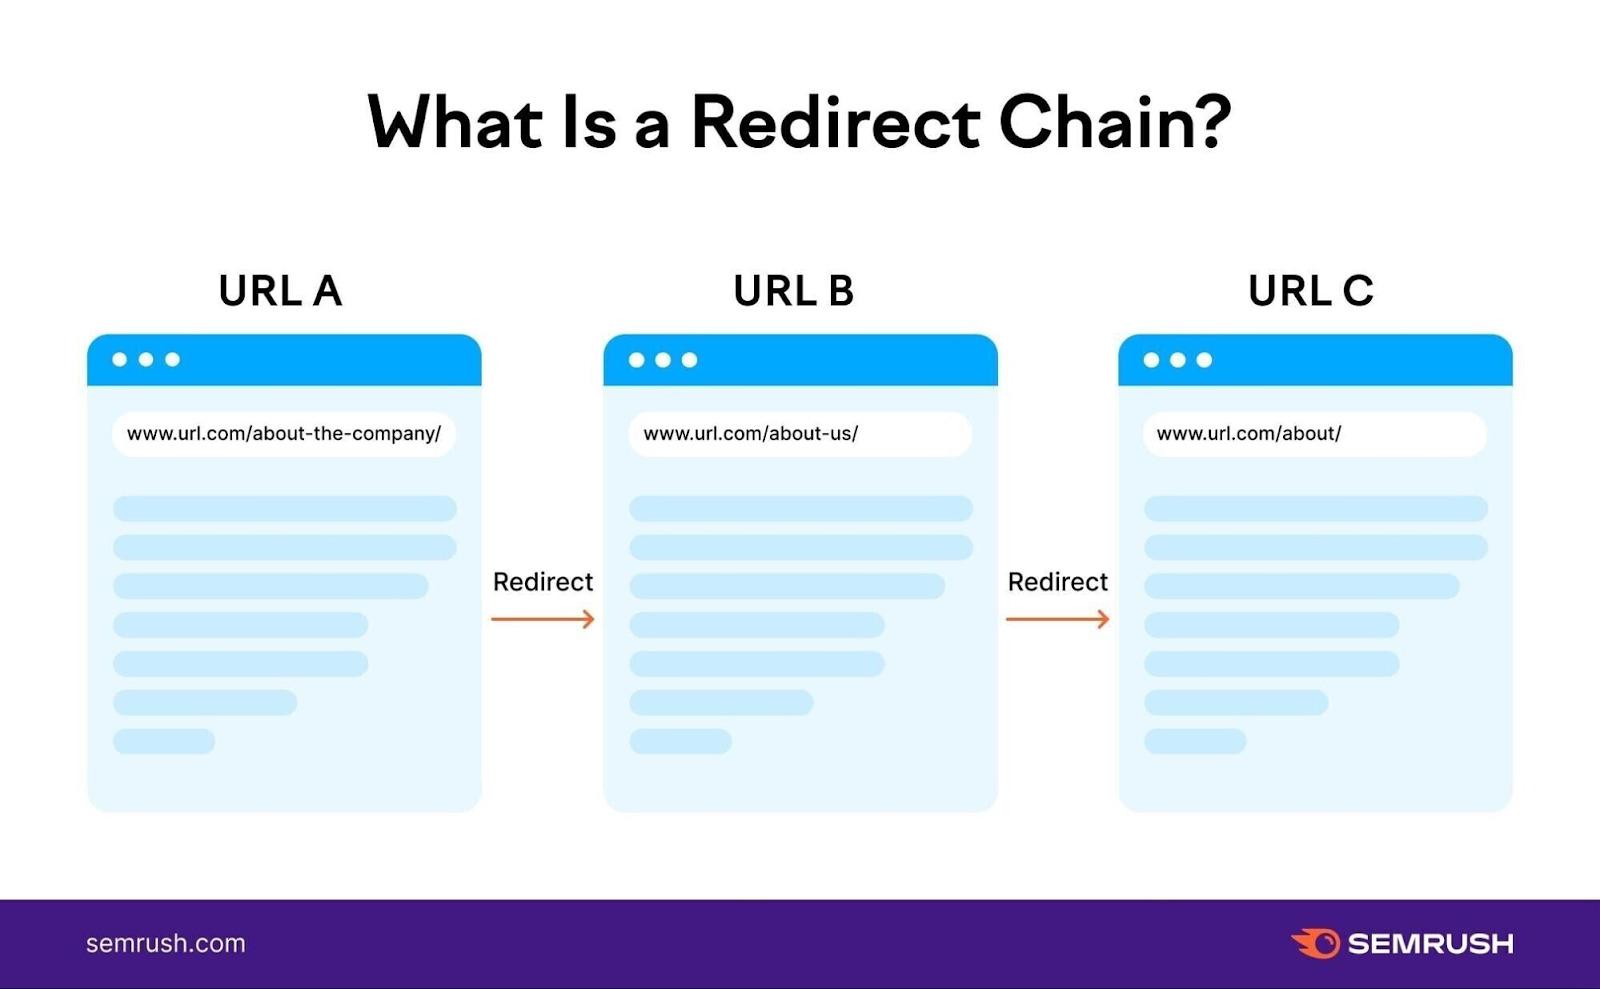 Diagram explaining a redirect chain with three URLs (URL A, URL B, URL C), showing redirects from one URL to another.